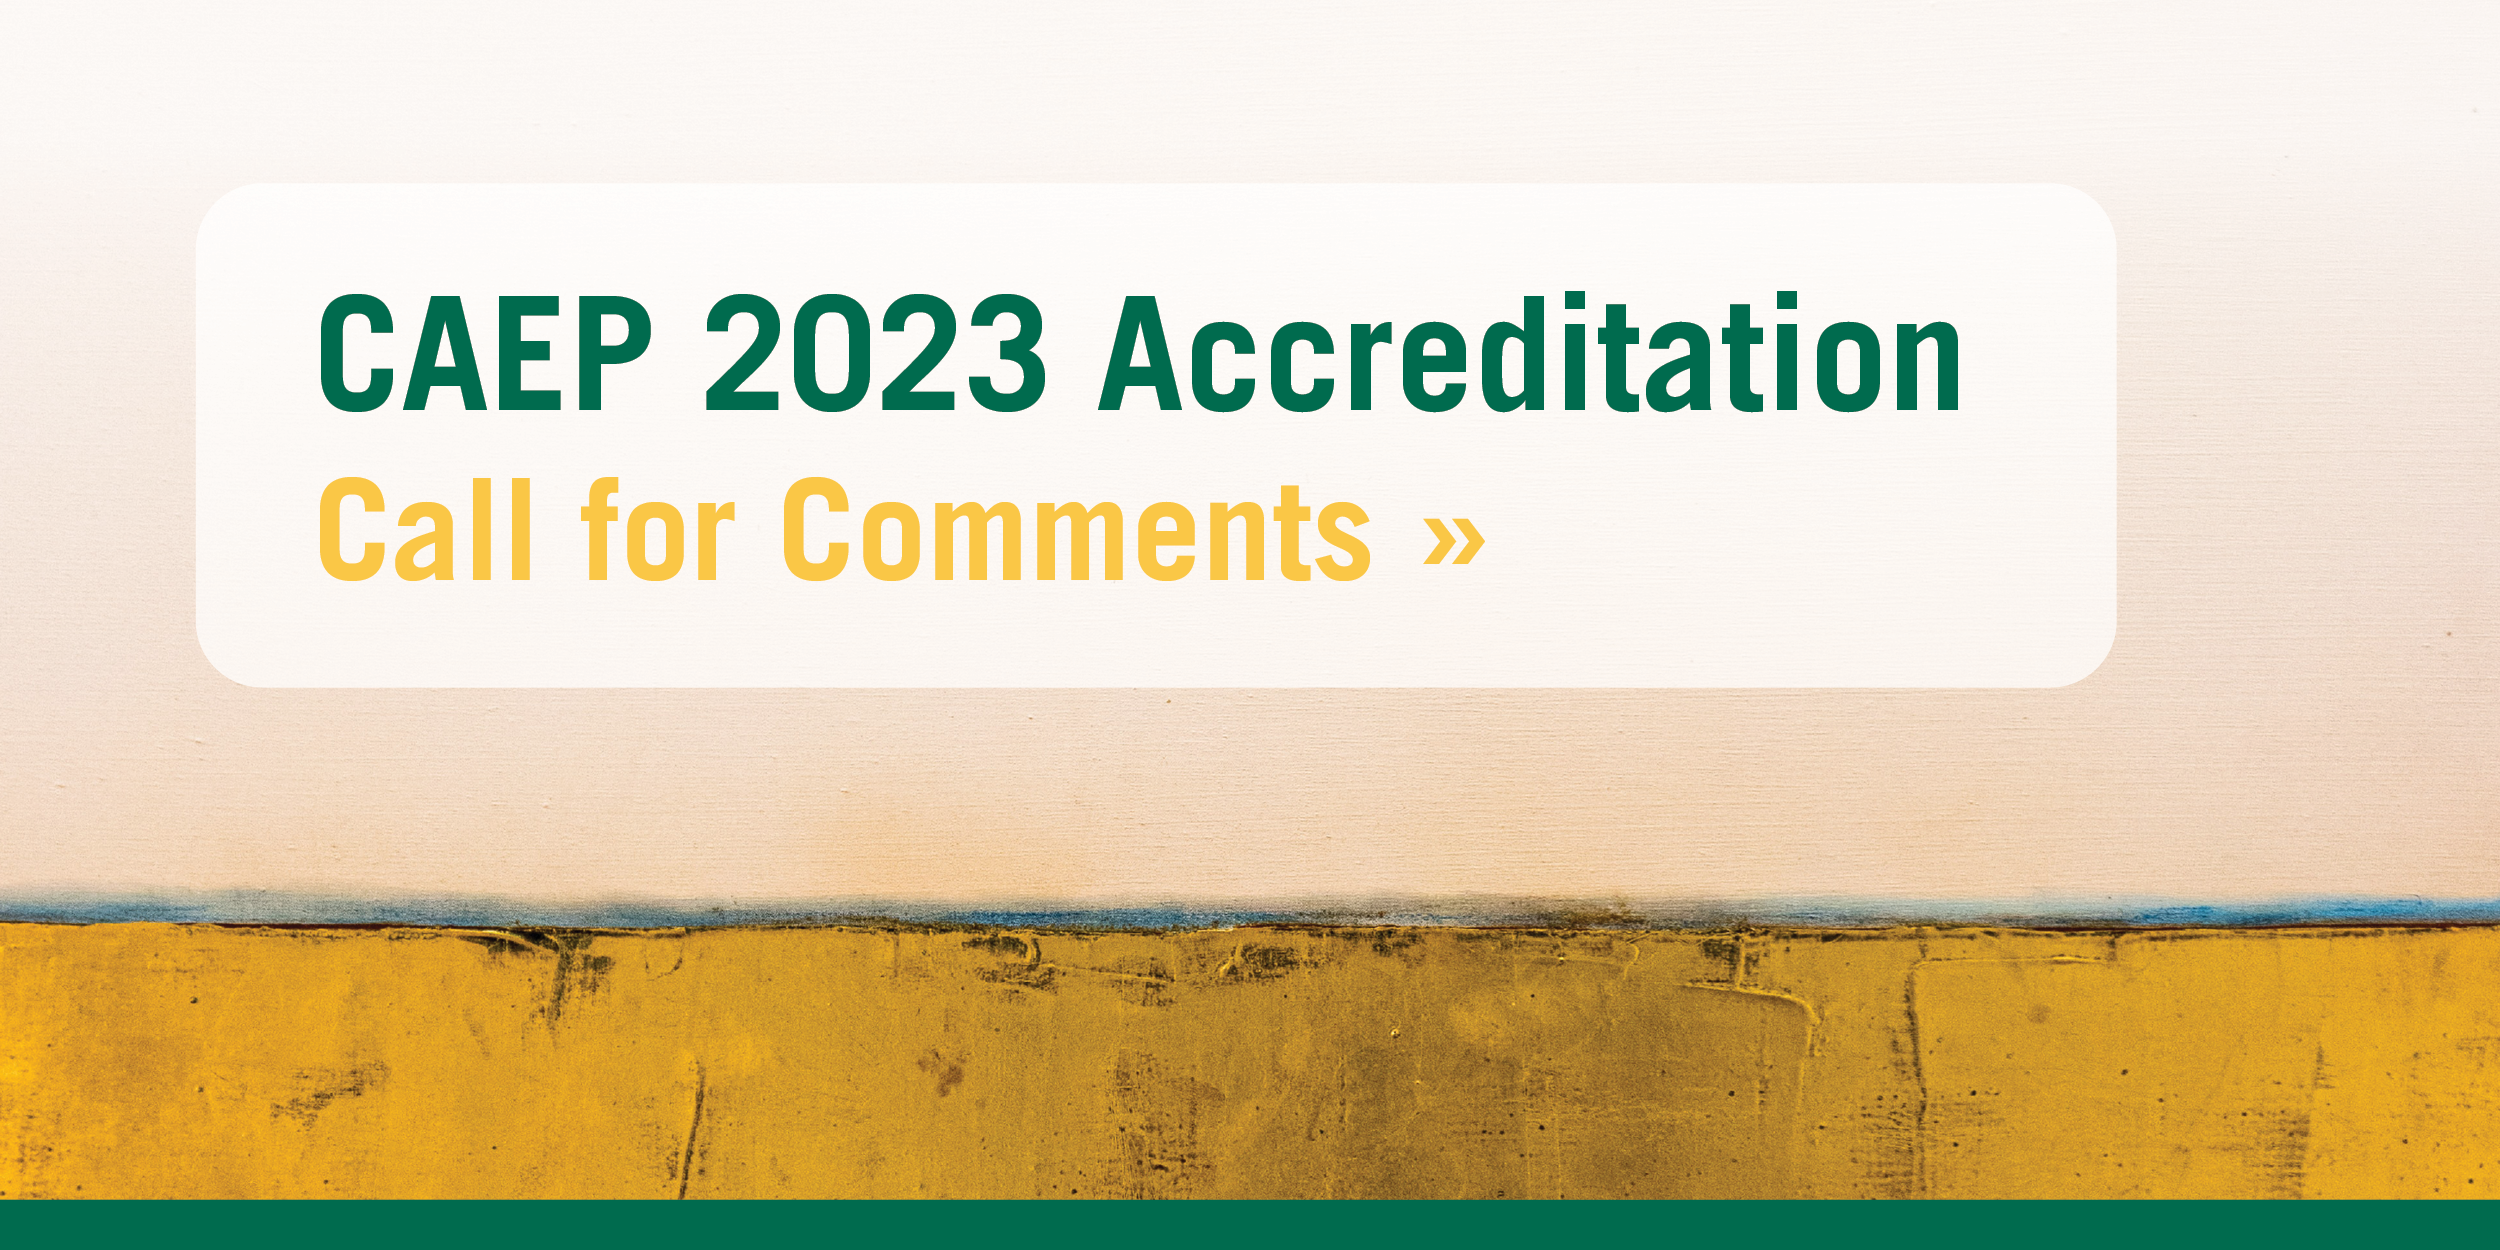 CAEP 2023 Accreditation Call for Comments